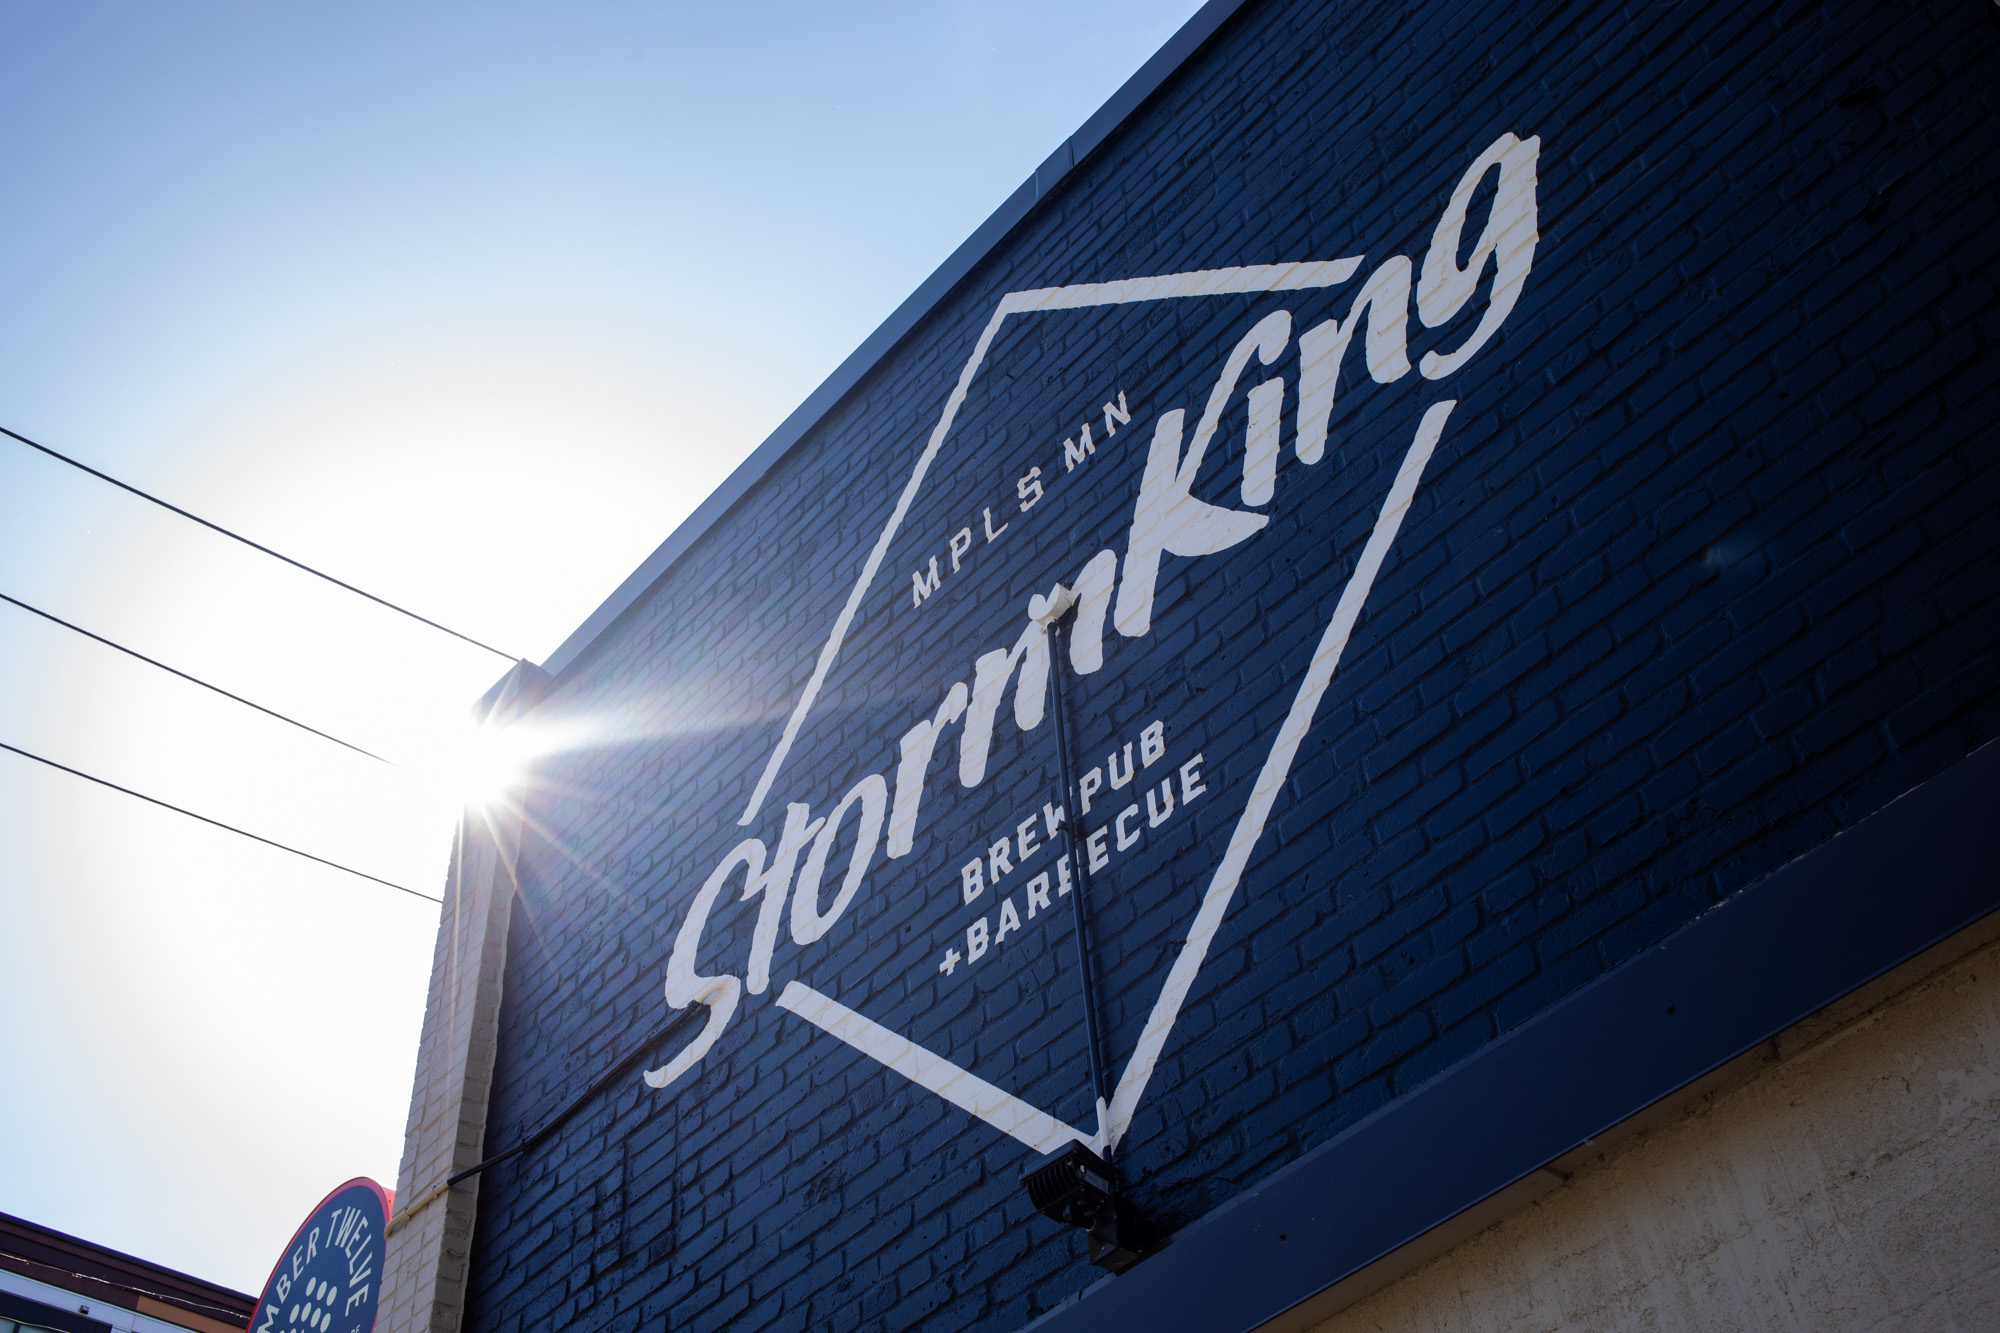 StormKing Barbecue and Brewpub opened May 10 in North Loop Minneapolis • Photo by Jordan Wipf